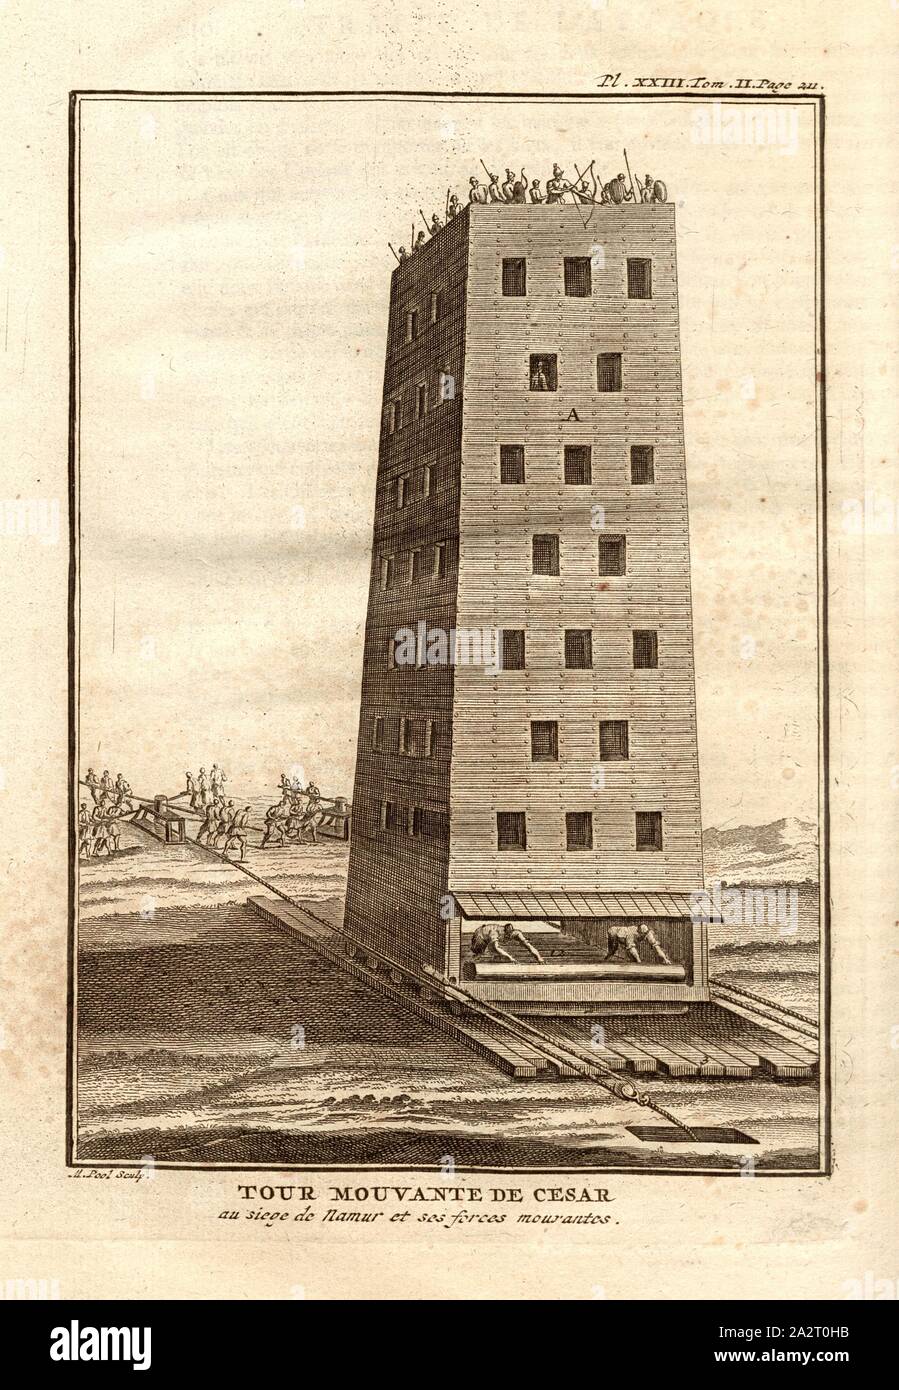 Caesar's Moving Tower, Movable tower used at the siege of Namur, signed: M. Pool sculp, Pl. XXIII, Tom., II., P. 210, Pool, M. (sculp.), 1774, Polybius; Vincent Thuillier; Jean Charles de Folard: Histoire de Polybe. Tome 2; Amsterdam: Arkstée et Merkus, MDCCLXXIV [1774 Stock Photo